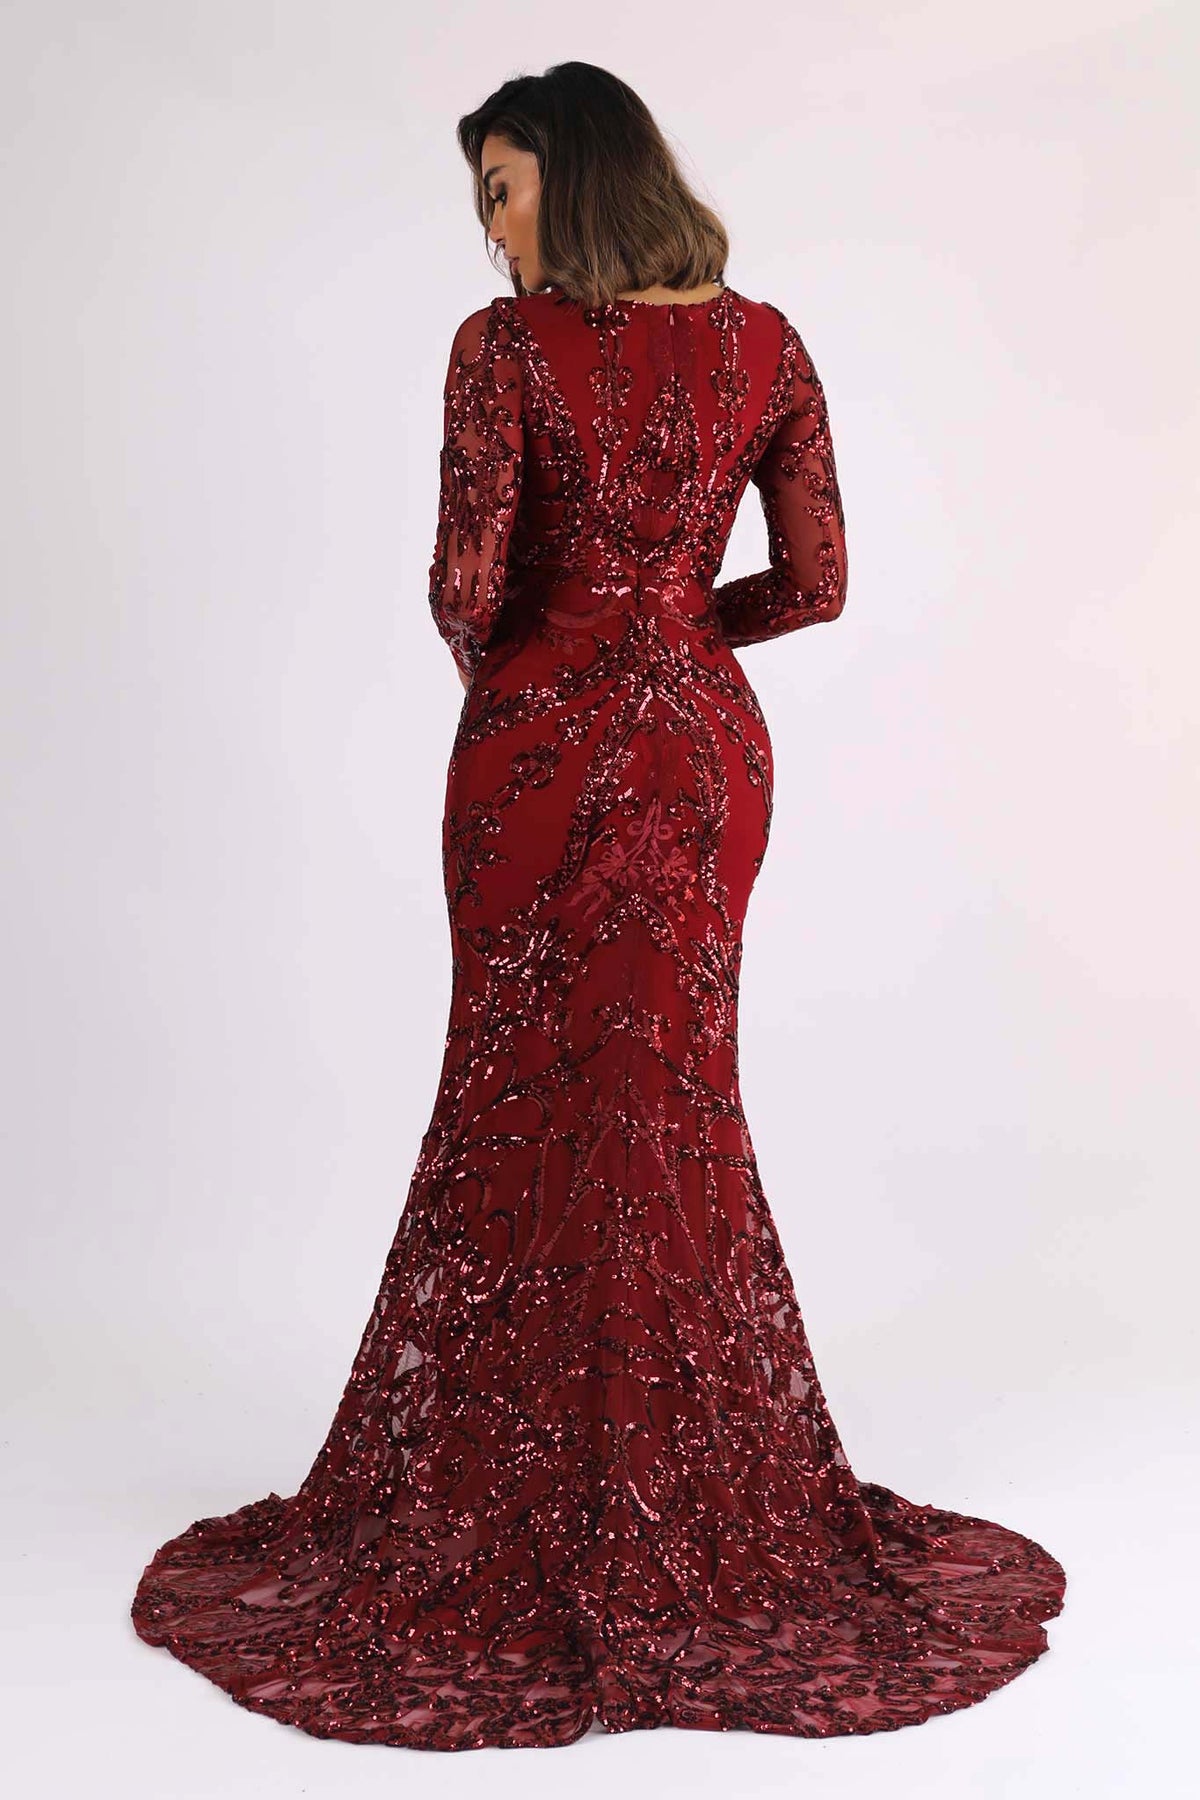 Back Image of Deep Red Long Sleeve Pattern Sequin Floor Length Evening Gown with Round Neck and Fit & Flare Silhouette